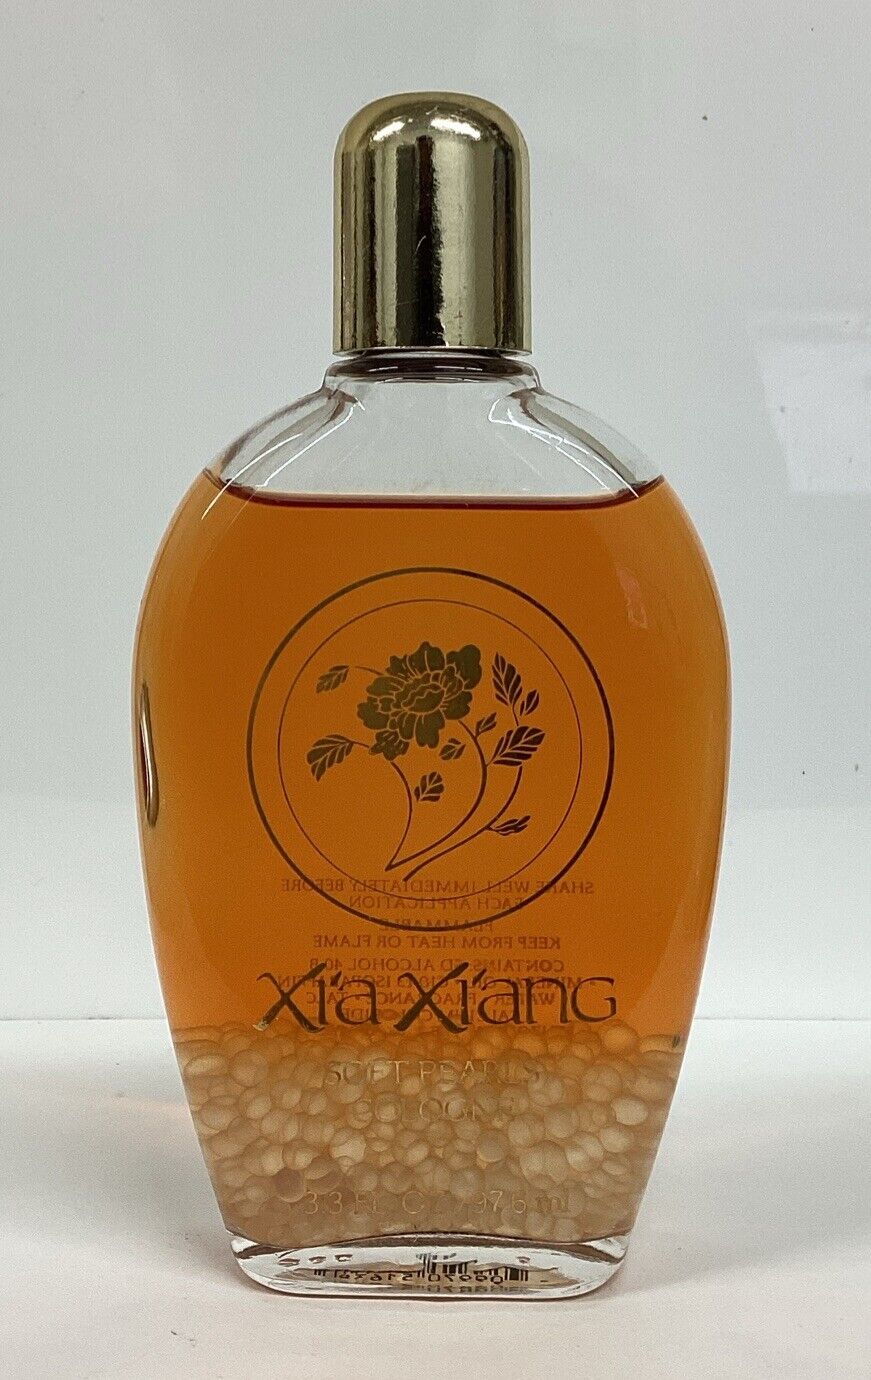 Xia Xiang Soft Pearls Cologne 3.3oz Discontinued Splash As Pictured, No Box